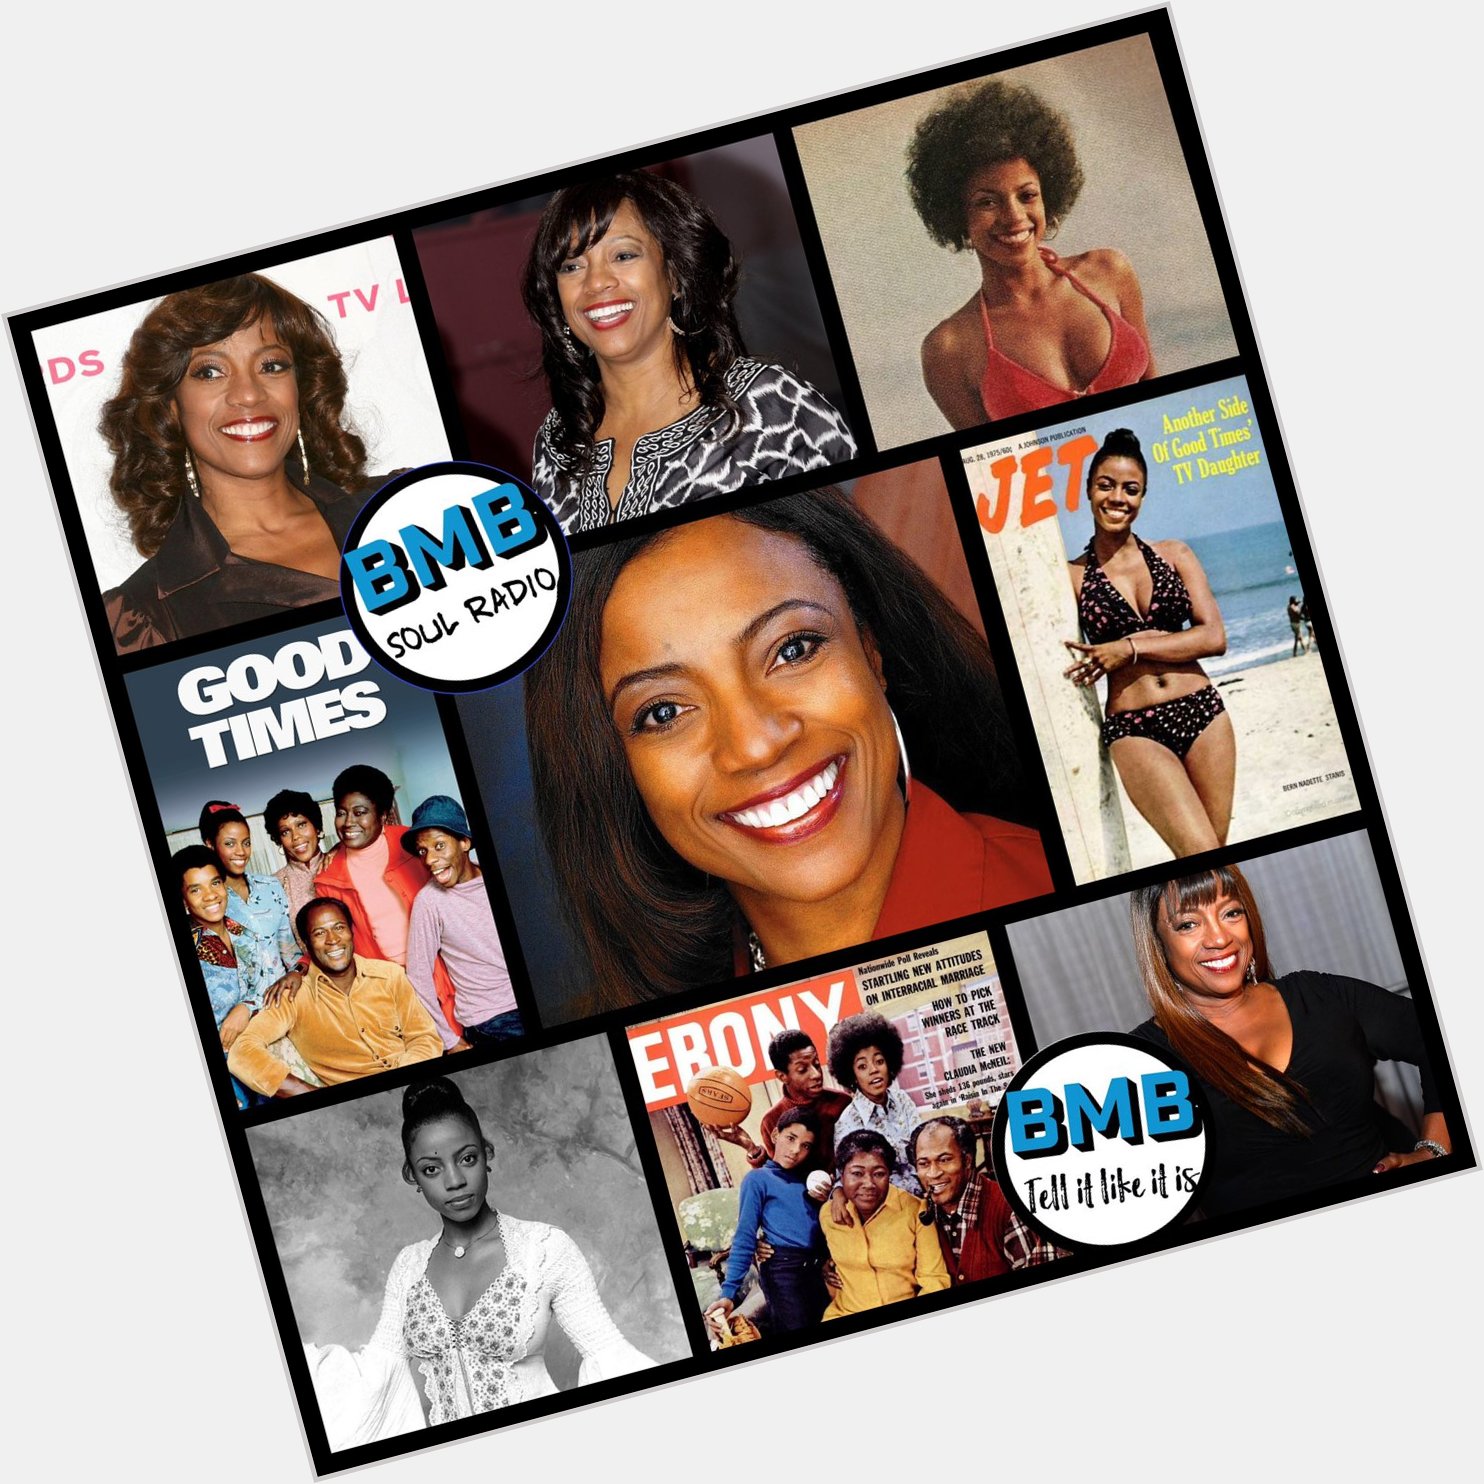      Happy Birthday Bern Nadette Stanis! She Is 68 Today!    